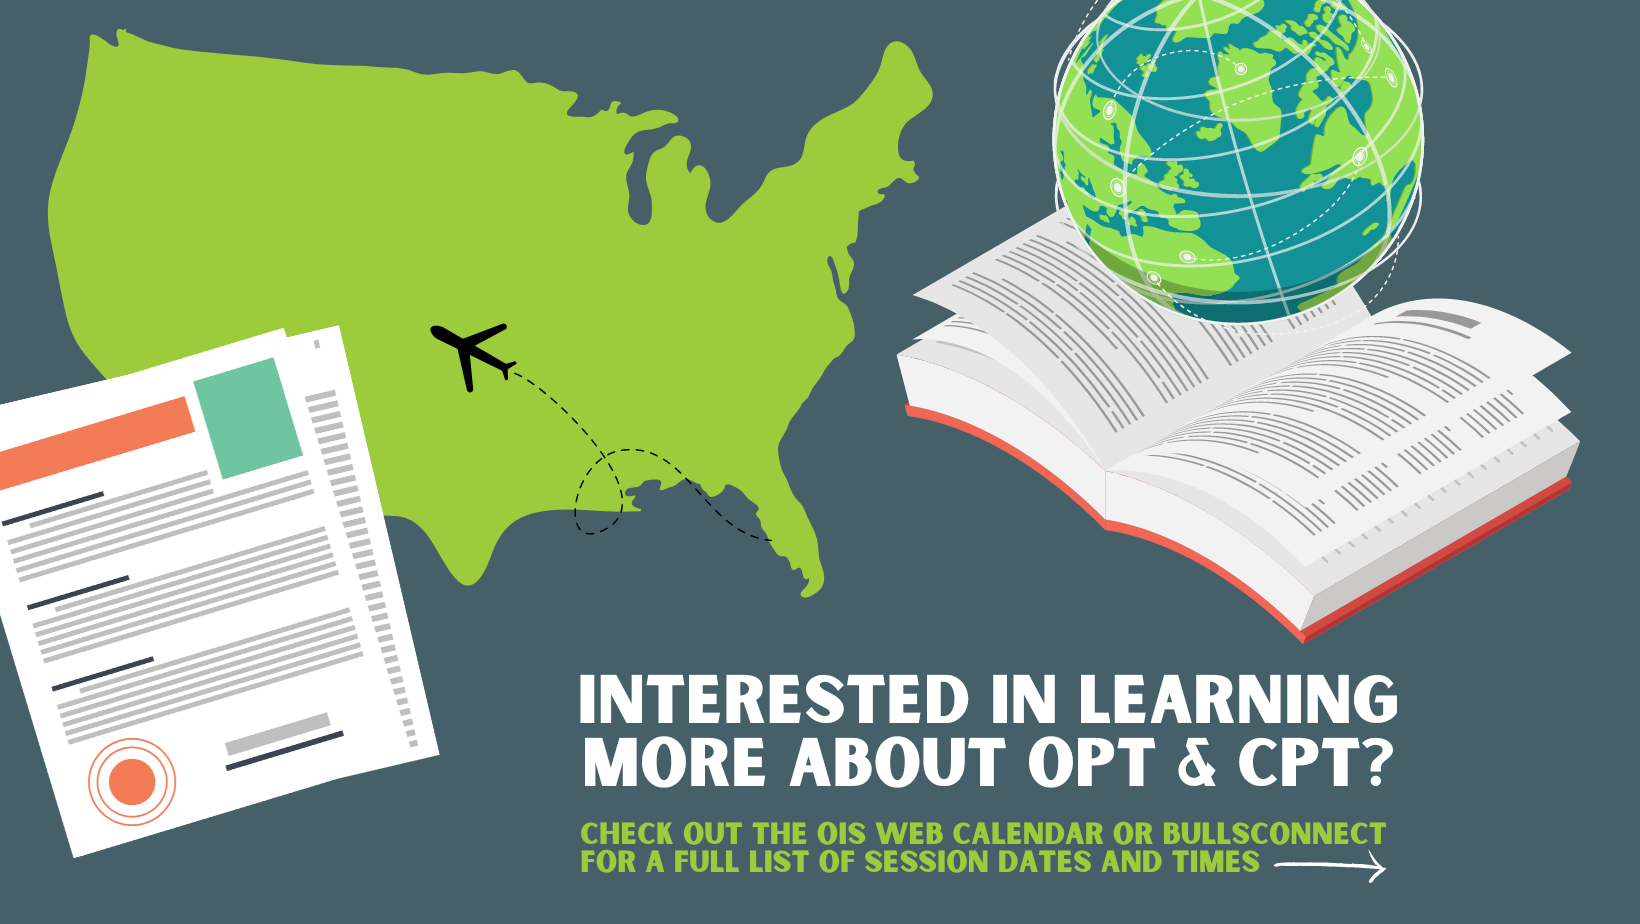 Slate background with images of a U.S. map, immigration documents, a textbook, and a globe and text that reads "interested in learning more about OPT & CPT? Check out the OIS web calendar or BullsConnect for a full list of session dates and times"